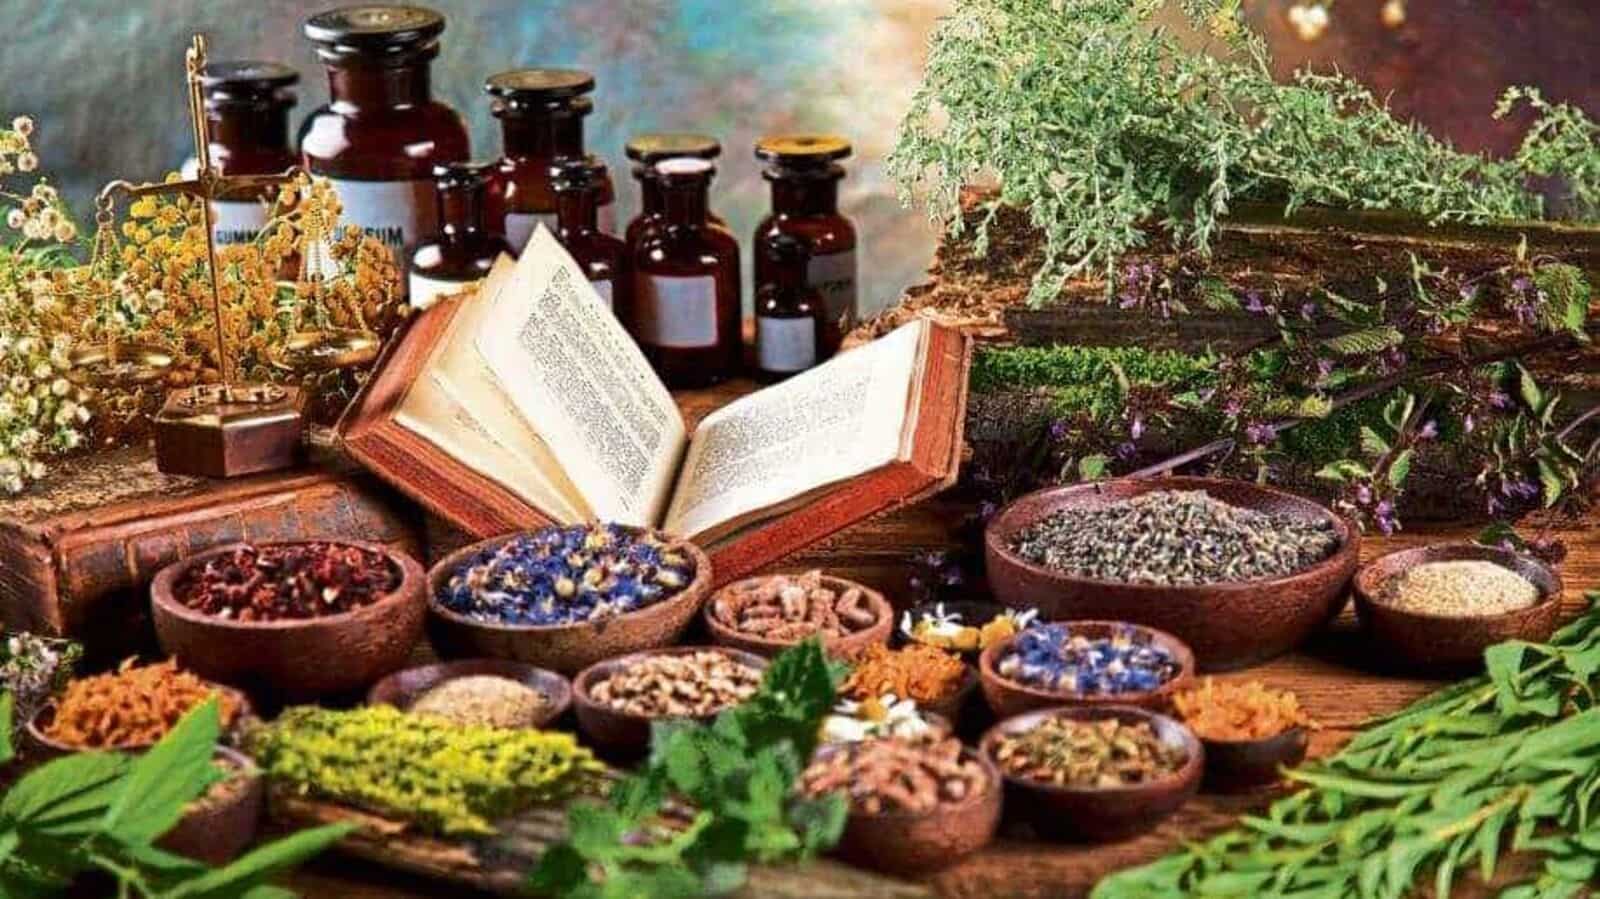 ayurveda-business-opportunities-with-ayurvedic-company-2021